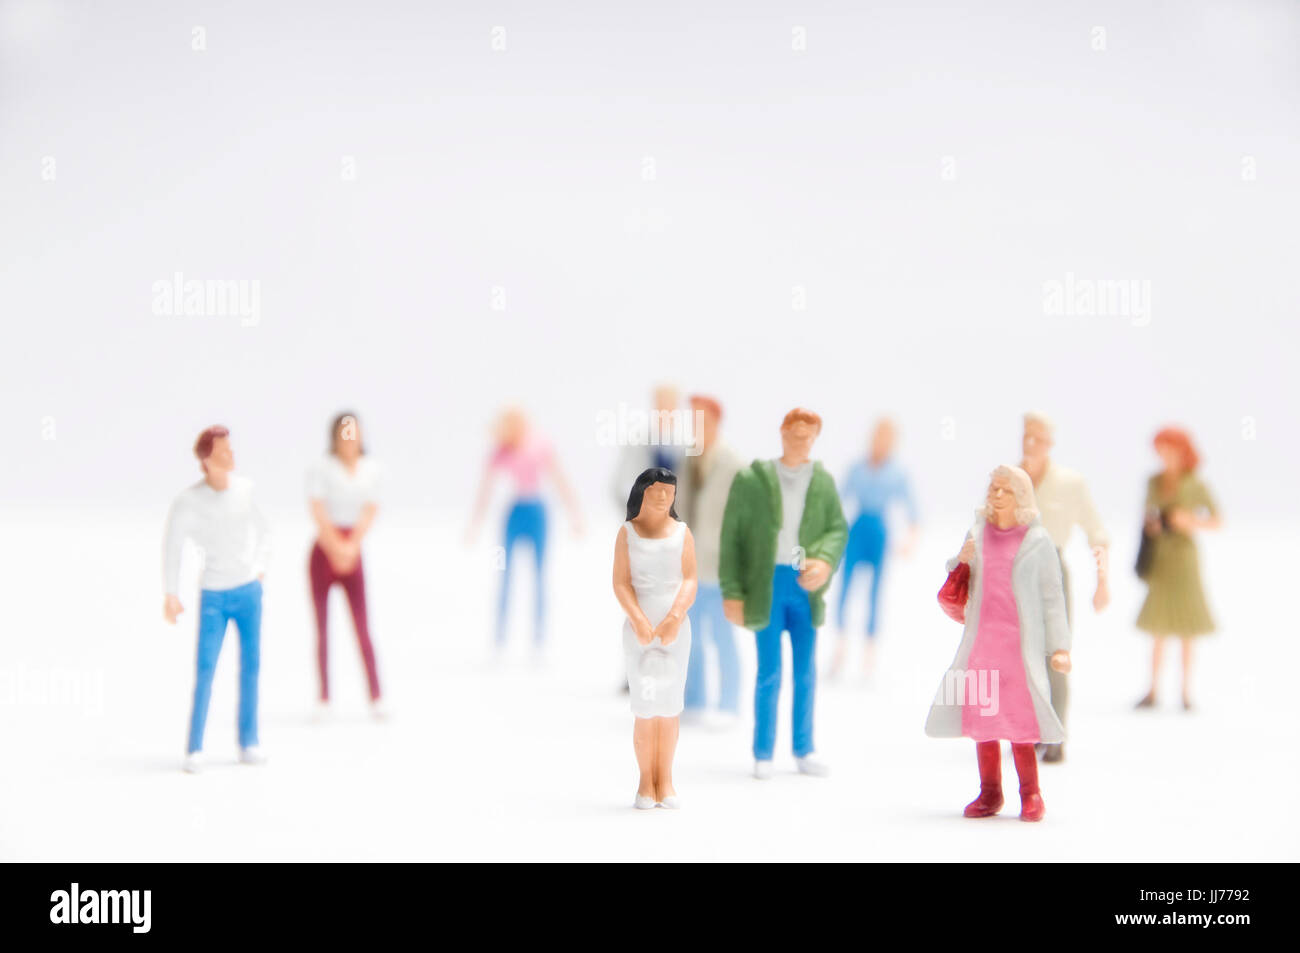 miniature figurines of women and men as concept for workforce, social media, sociology Stock Photo